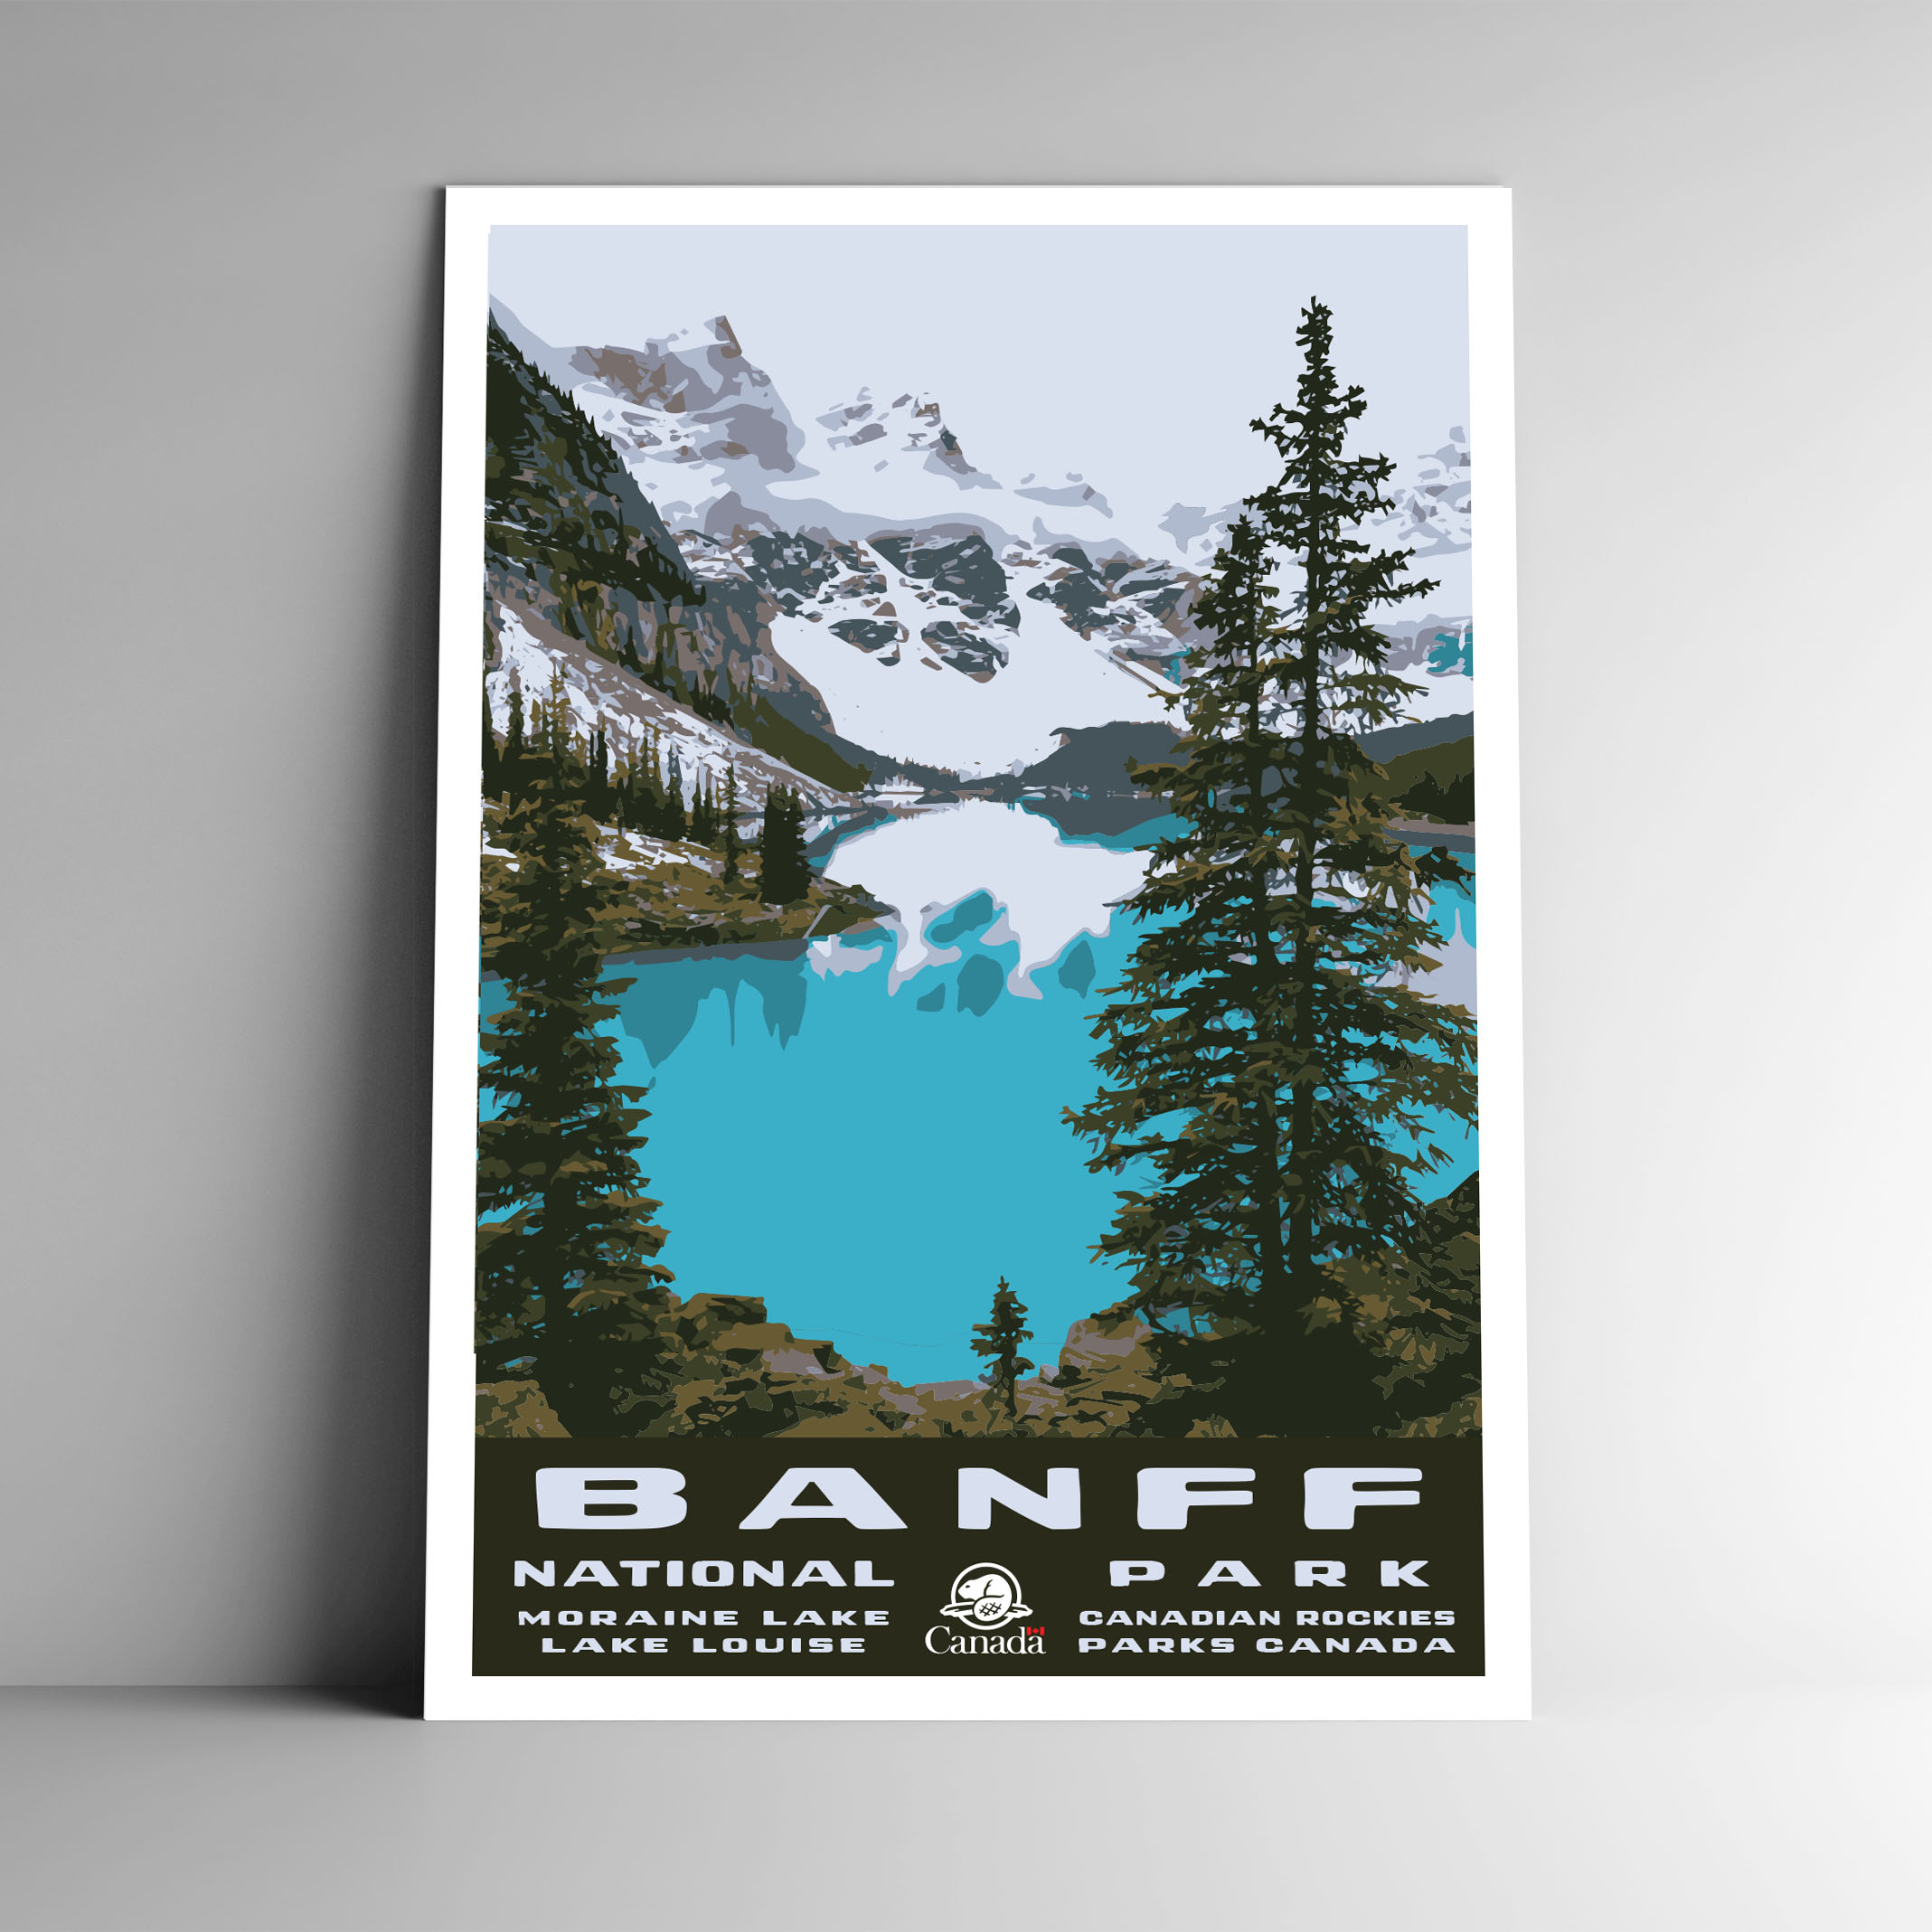 Home & Living 8x10 Canada - 12x18 :: National Poster Wall Decor Travel - Parks WPA-Style 18x24 Banff Vintage-Style - Alberta Art 4x6 Parcs / / Postcard Wall :: :: Canada - Park 24x36